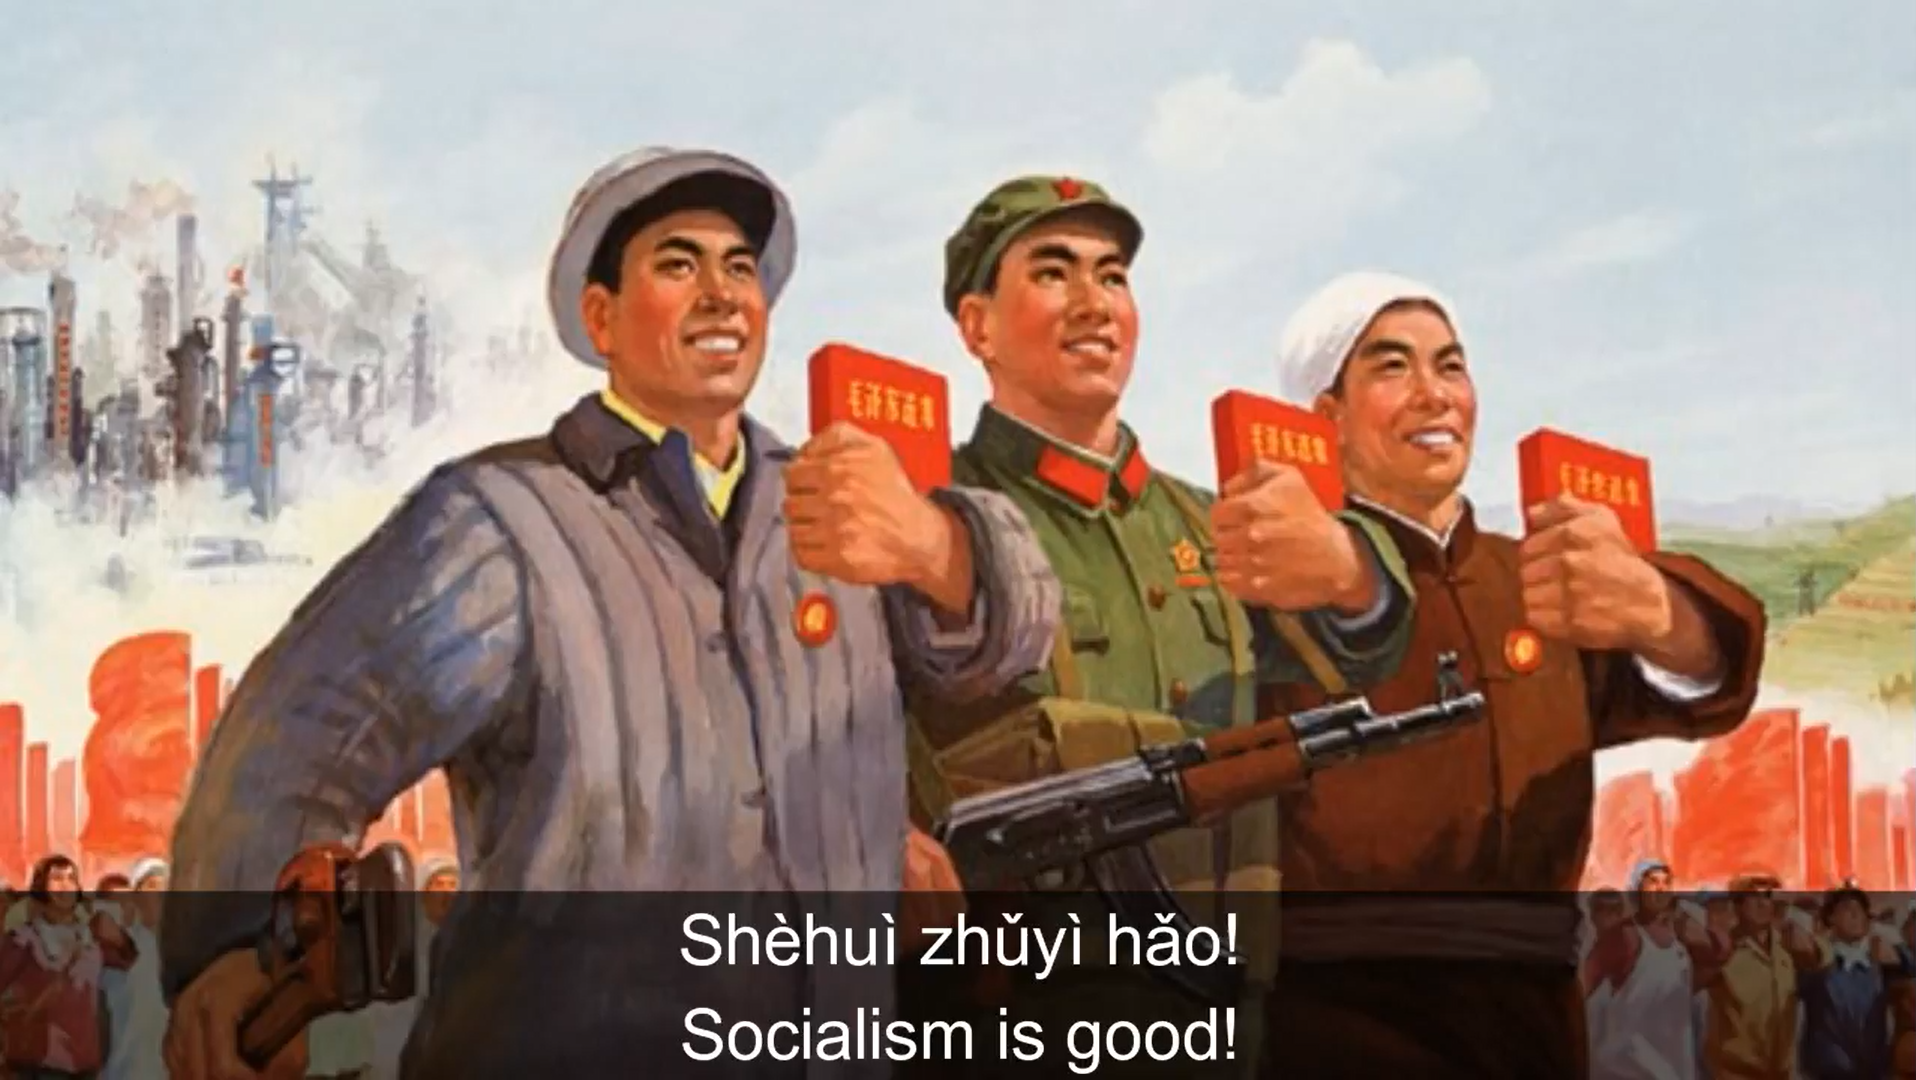 Chinese communist poster with the text "Socialism is good!" in both Chinese Pinyin and English